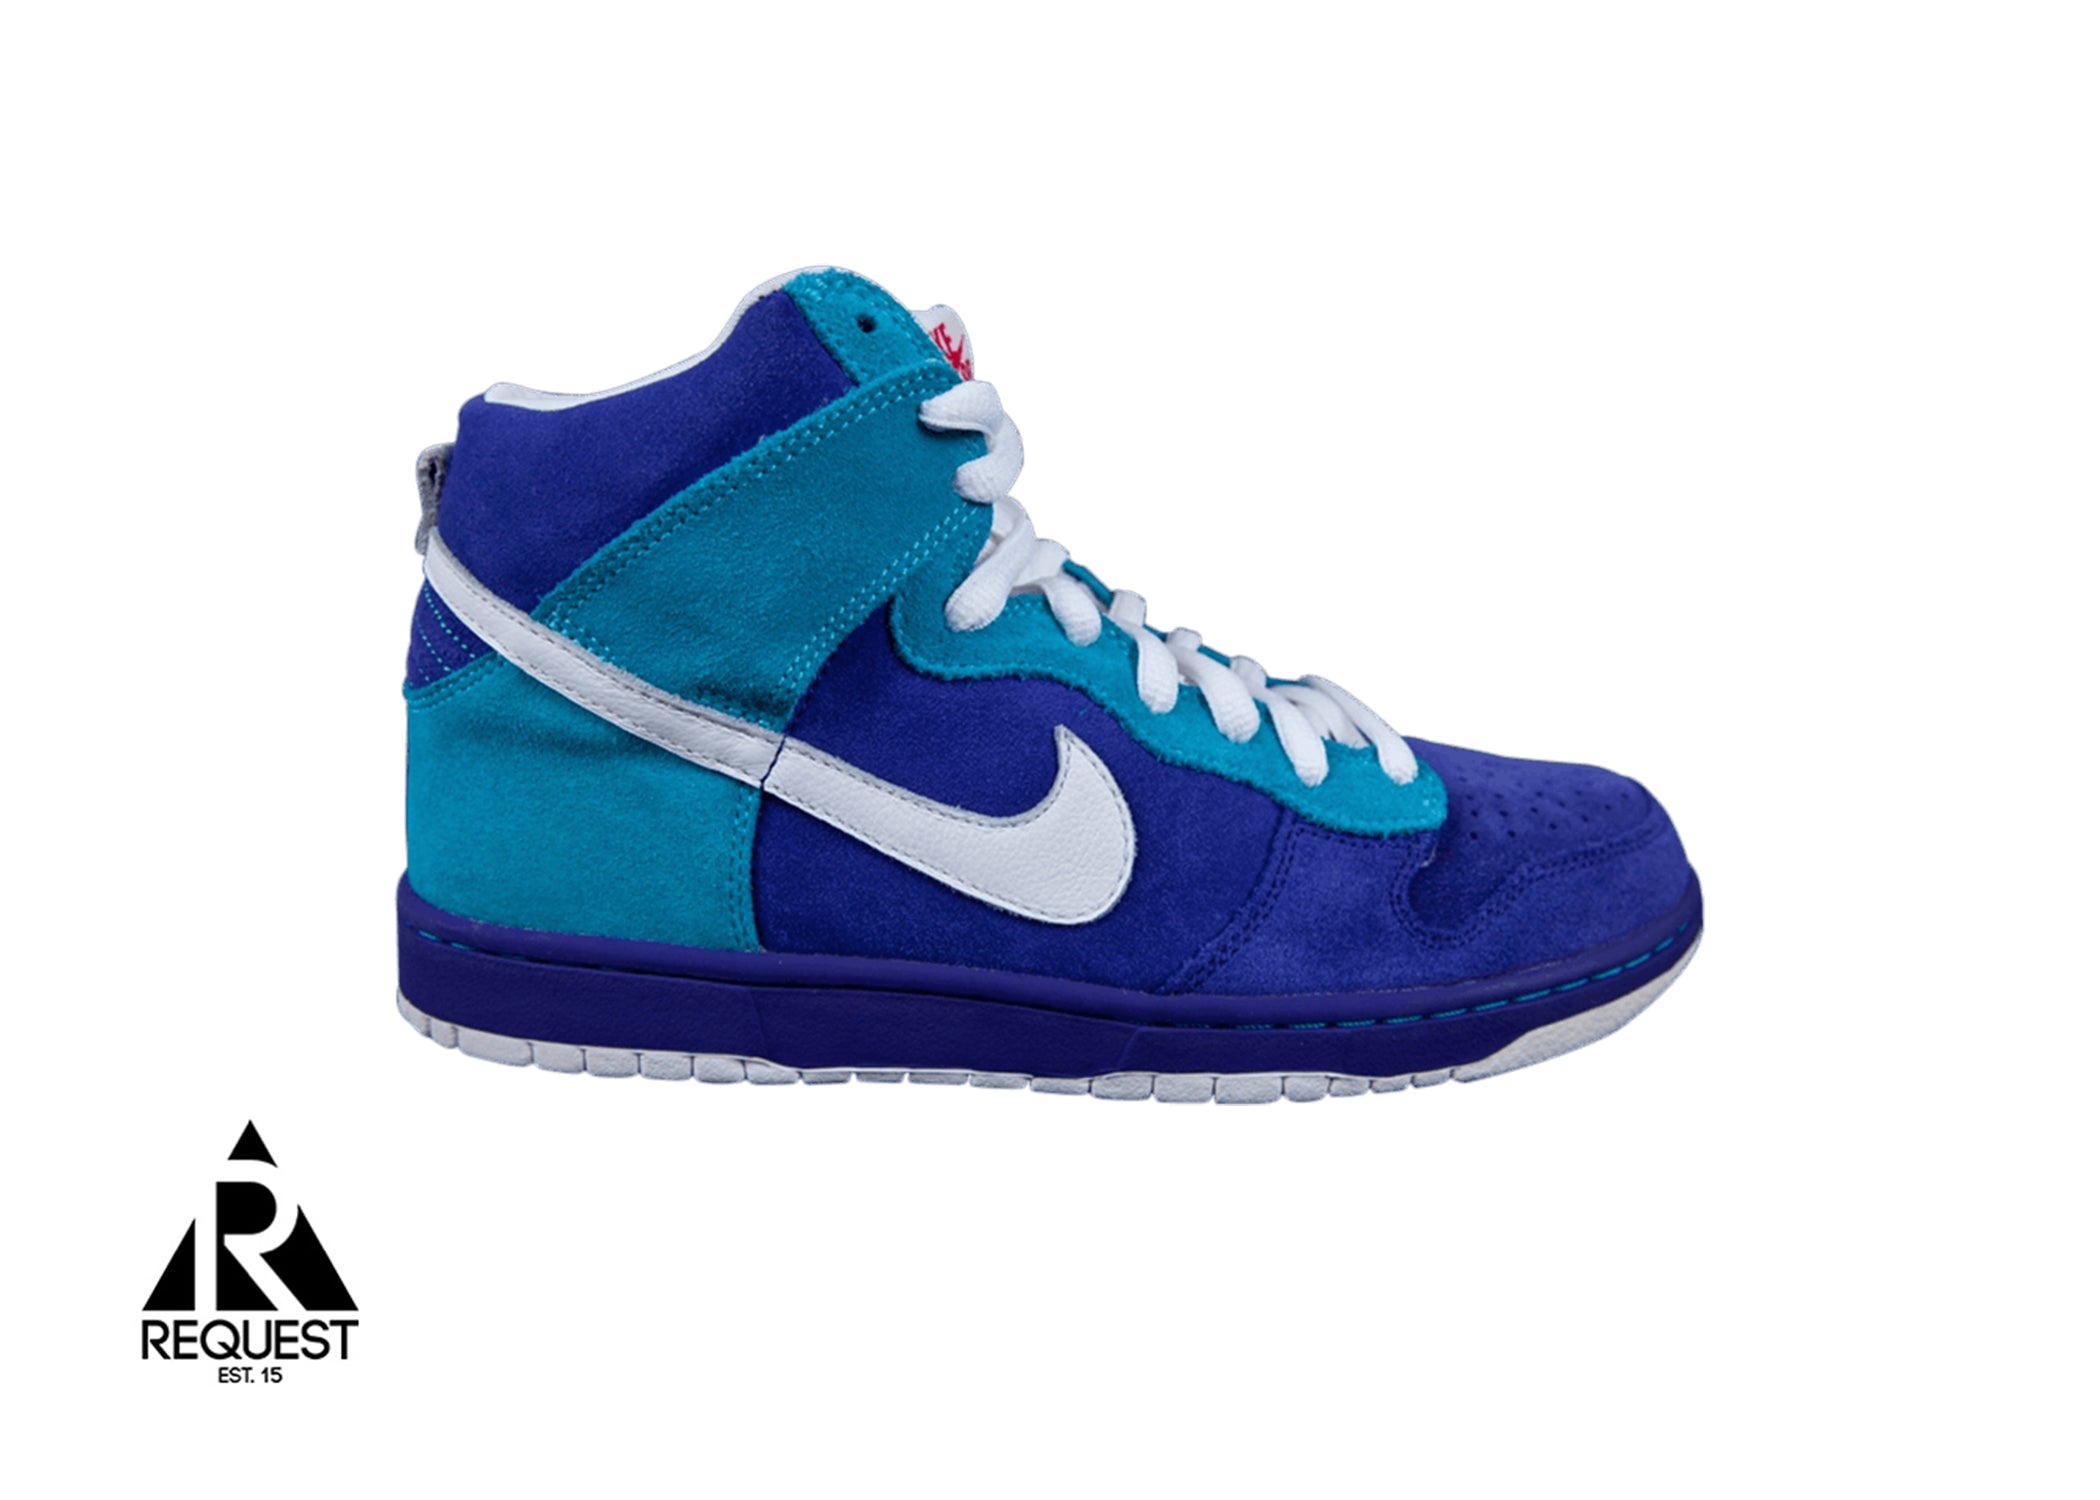 Nike SB Dunk High “Oceanic Airlines”